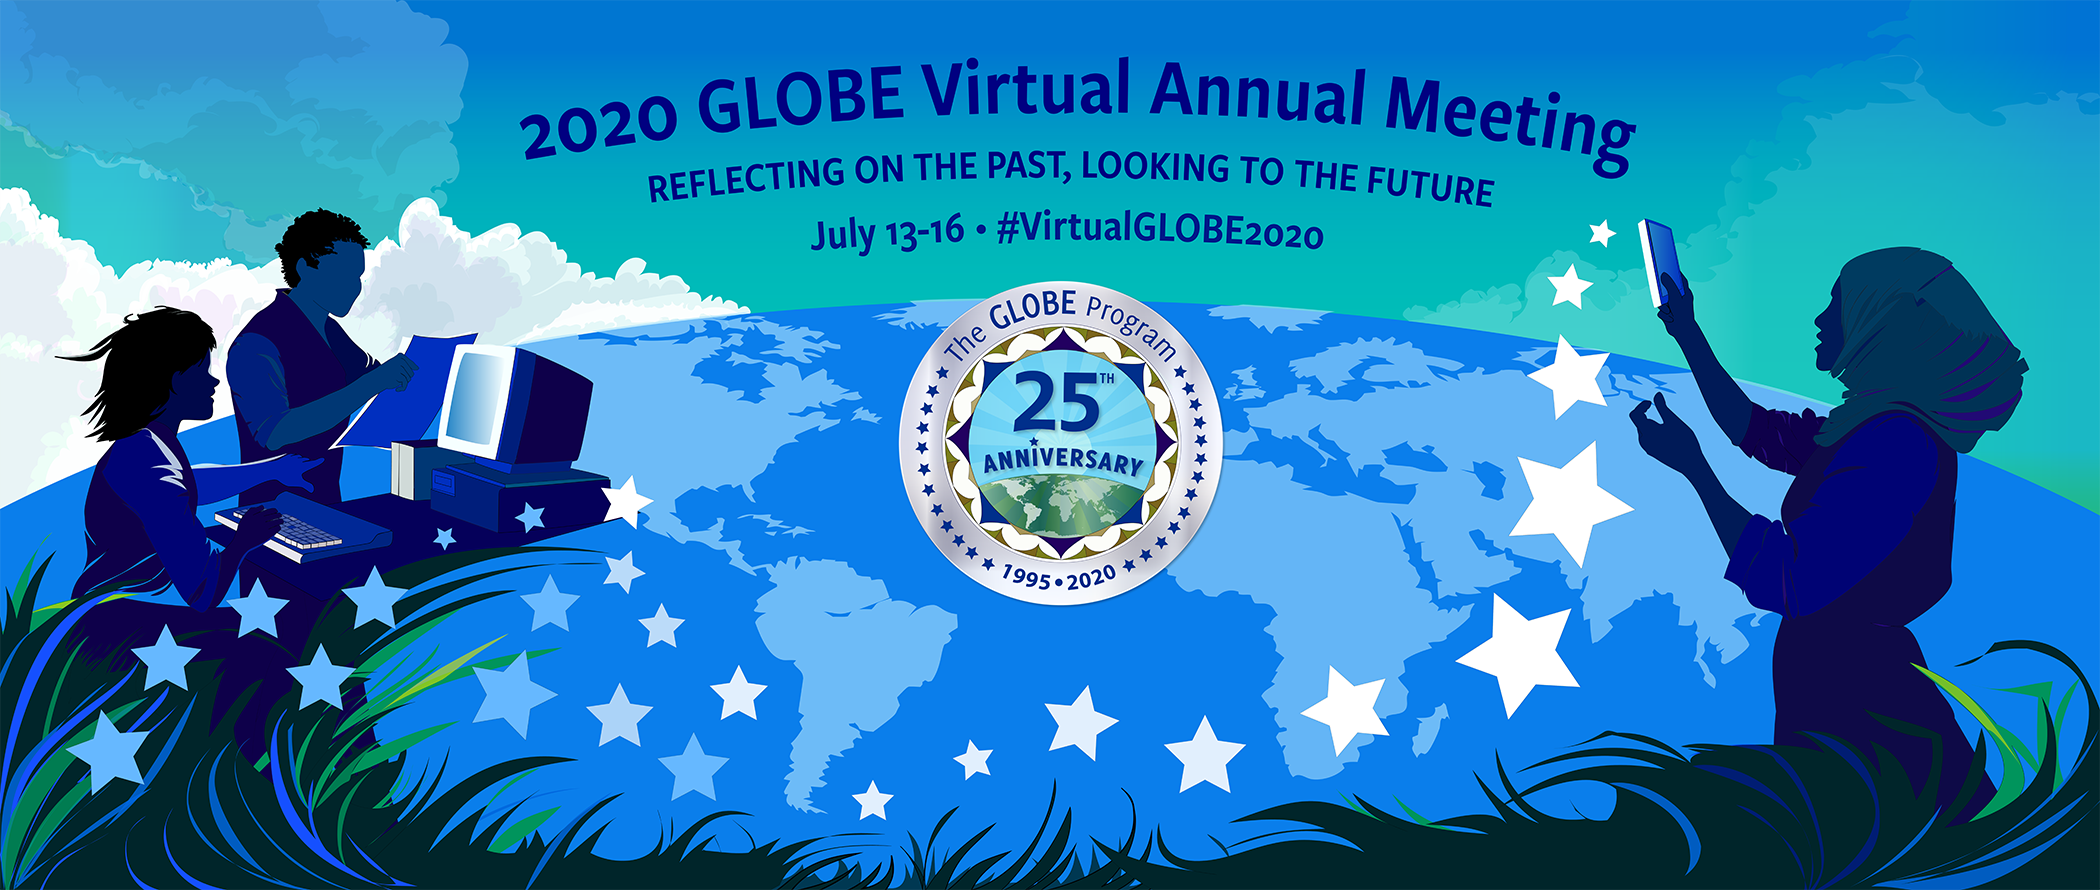 Banner for the 2020 GLOBE Virtual Meeting